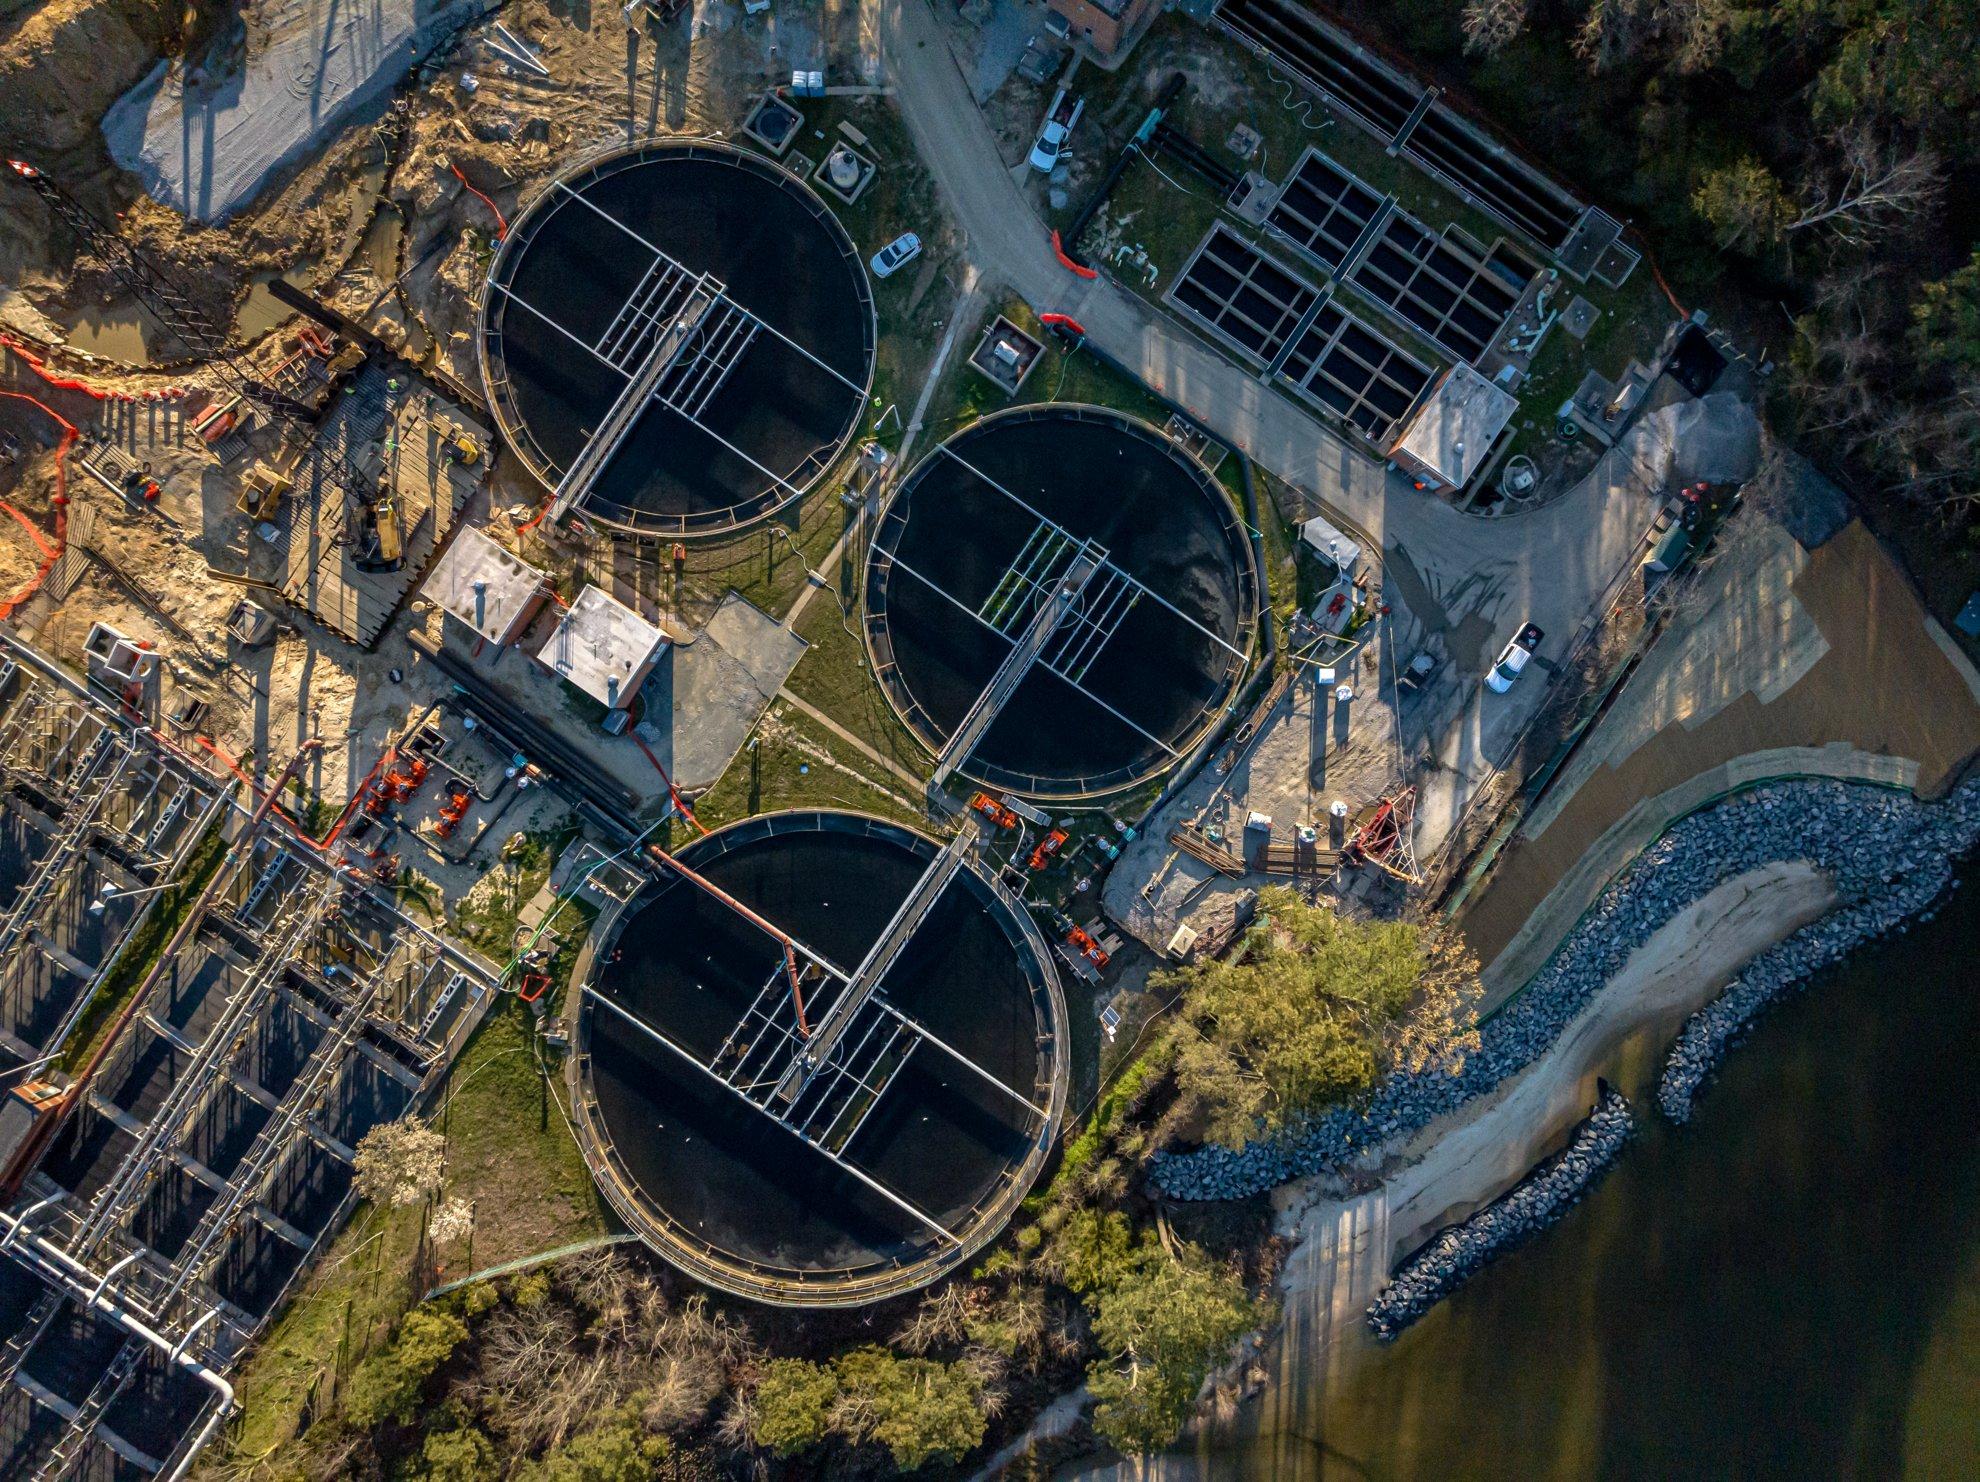 View from above of three reservoirs at a water treatment plant.